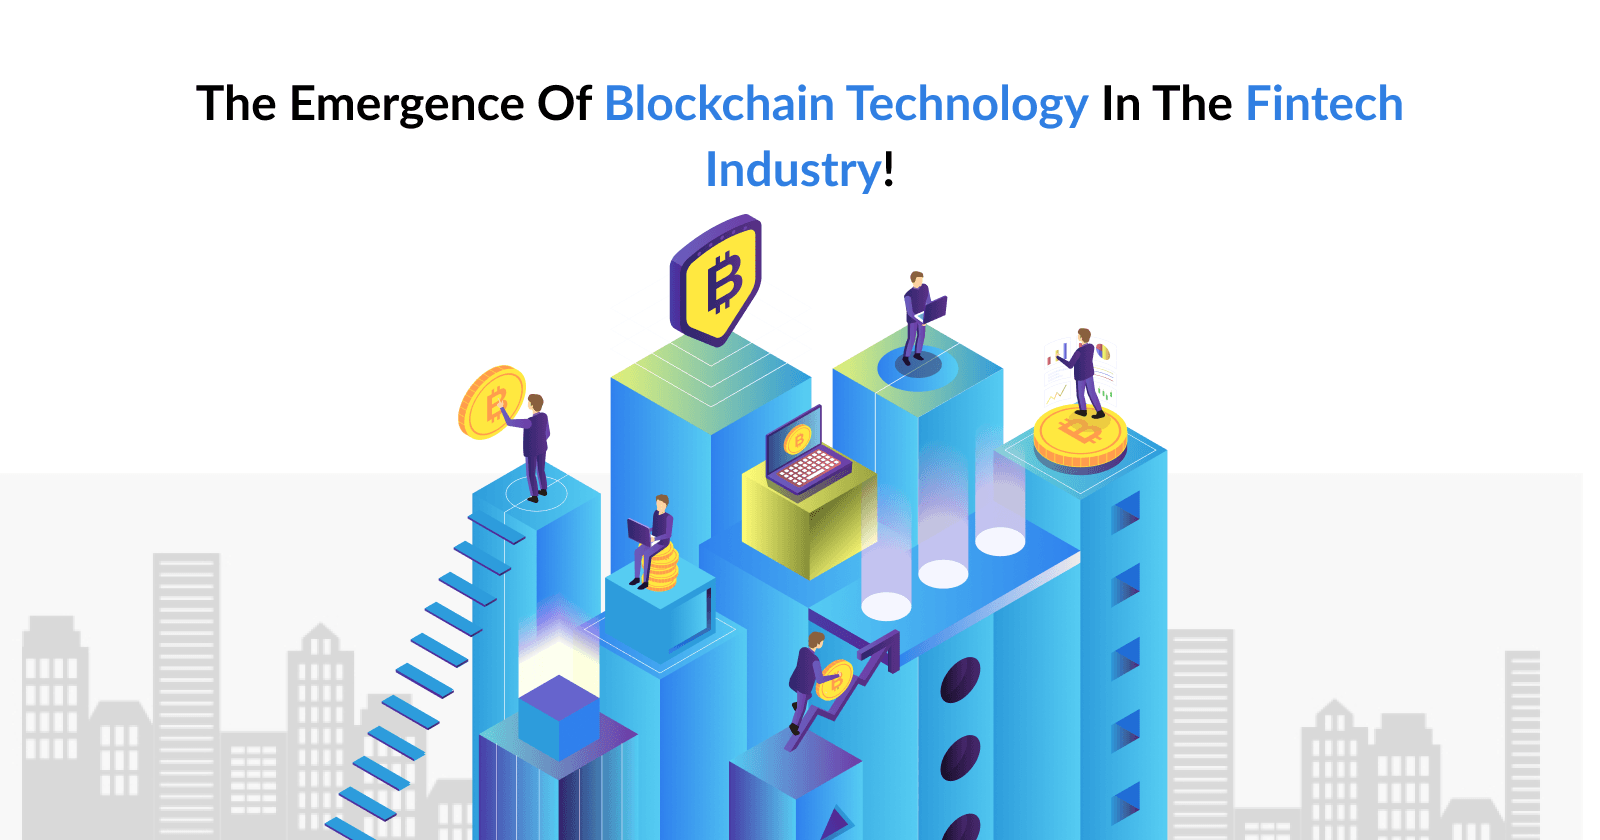 The Emergence of Blockchain Technology in the Fintech Industry!